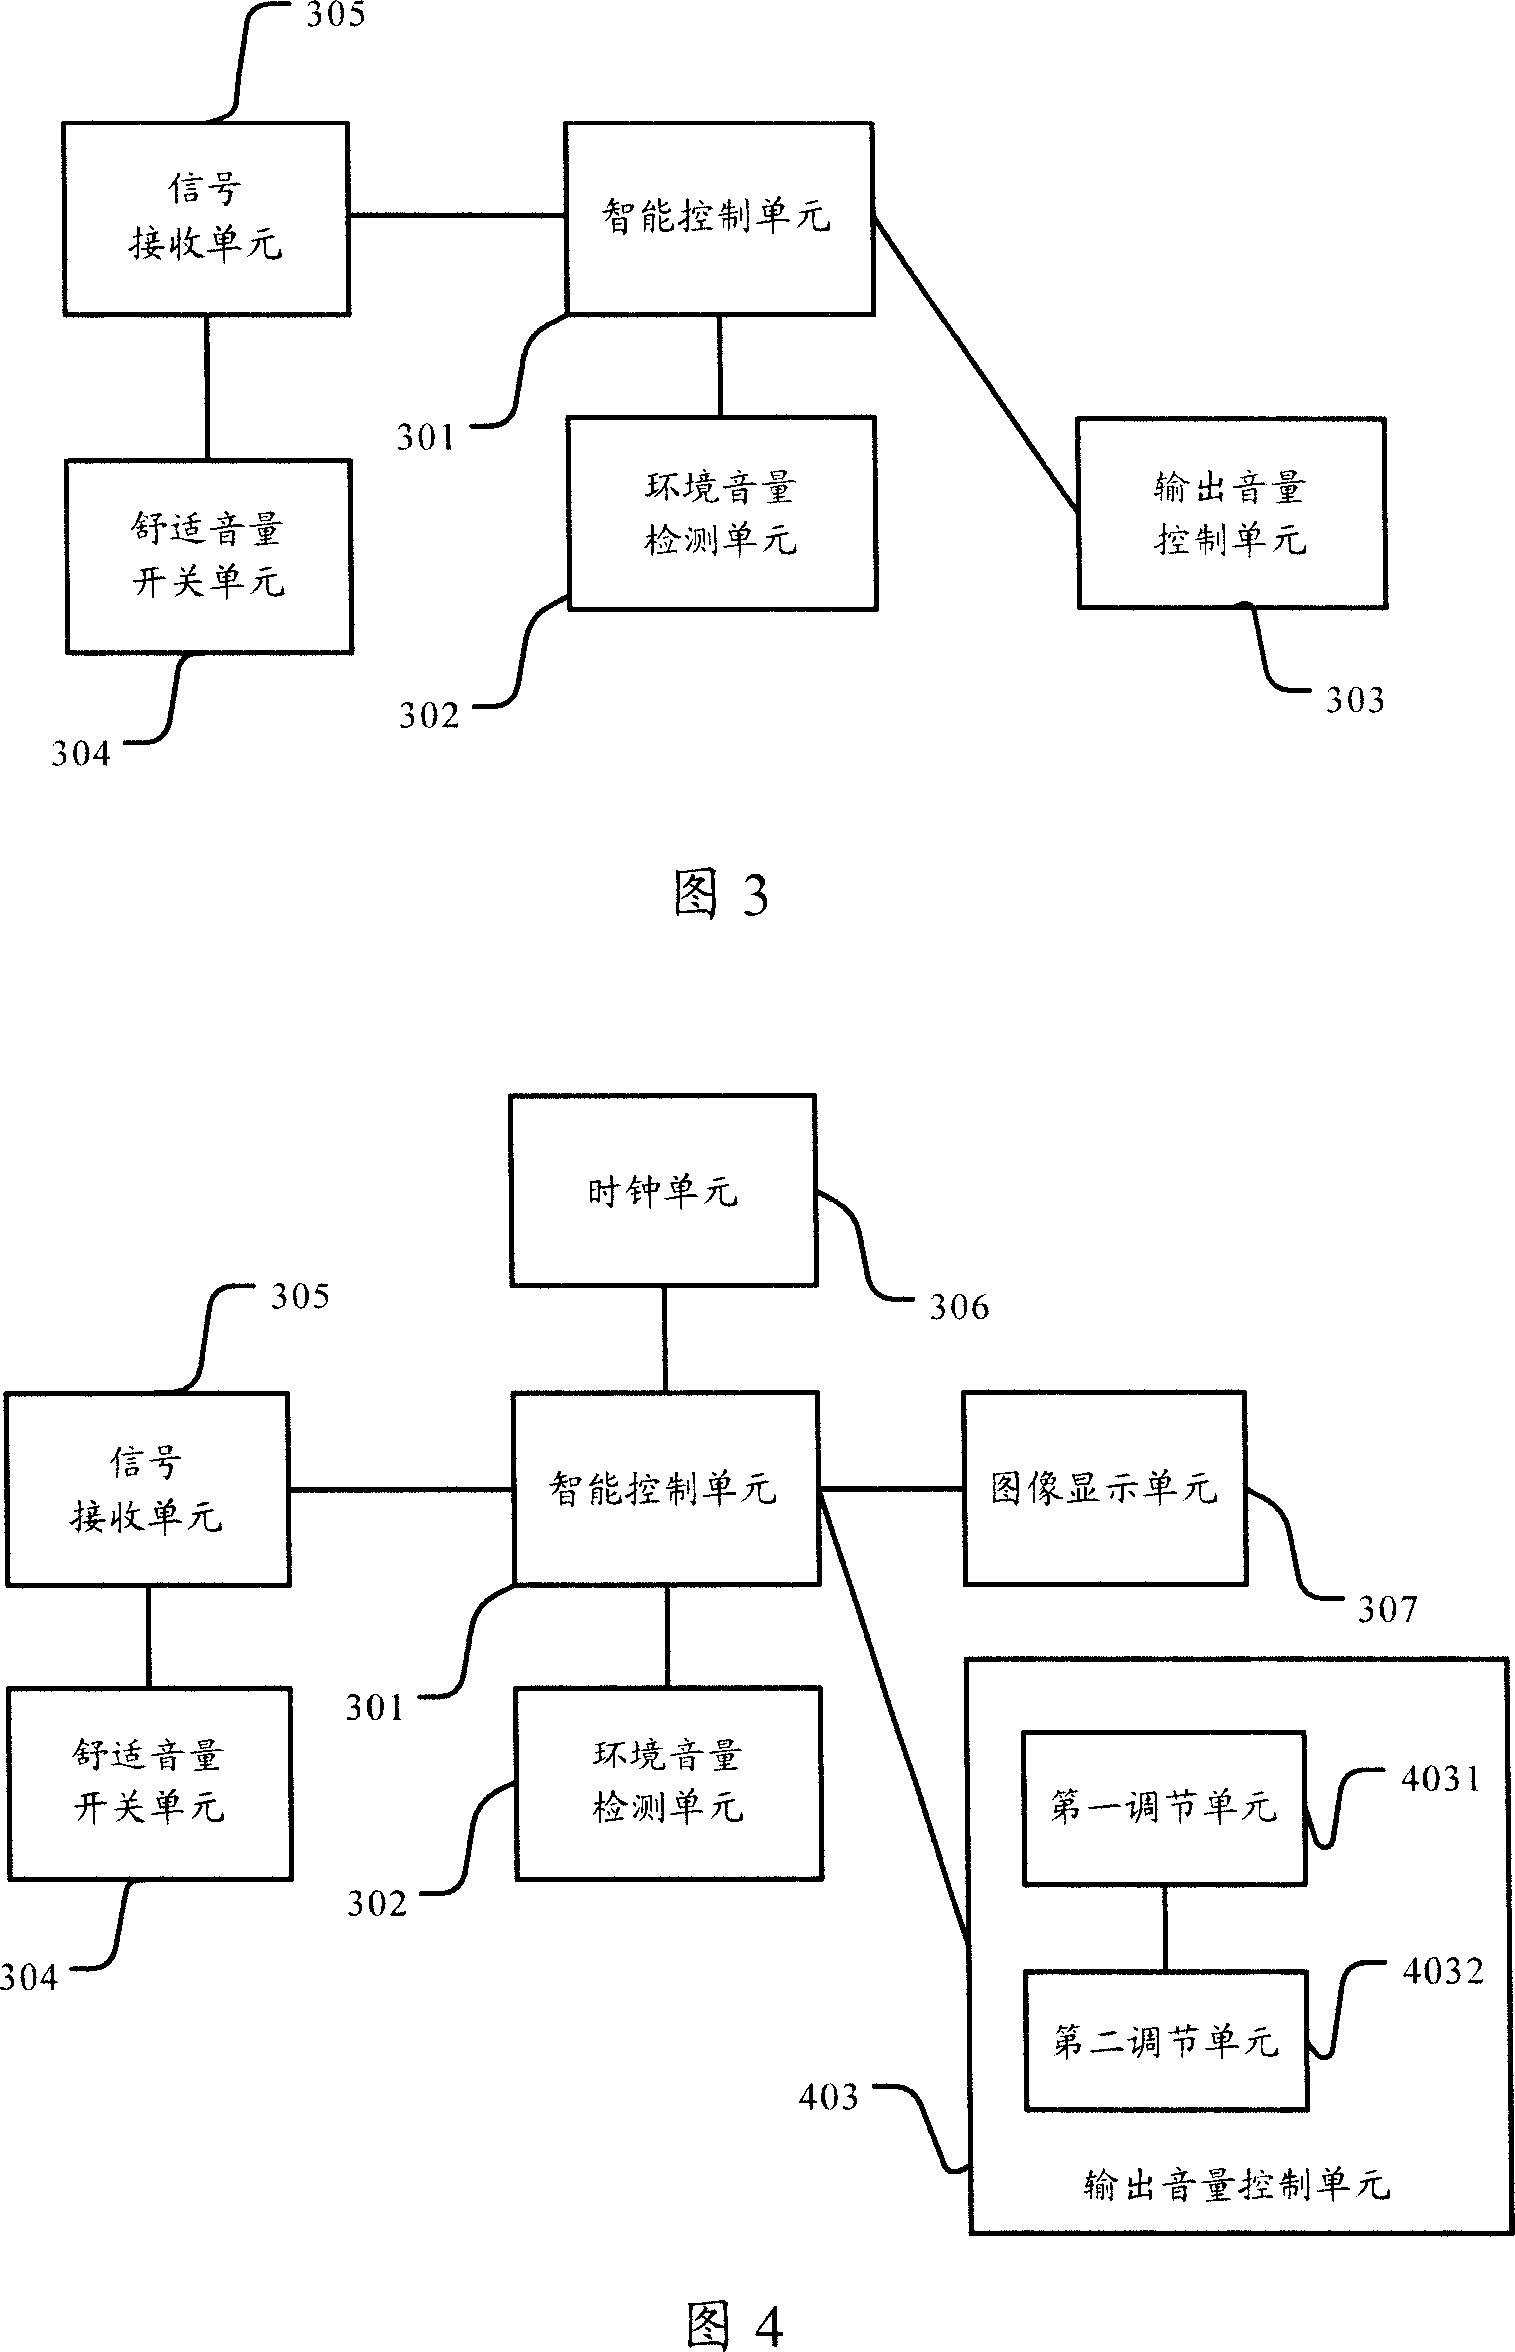 Method and device for automatically regulating device voice volume